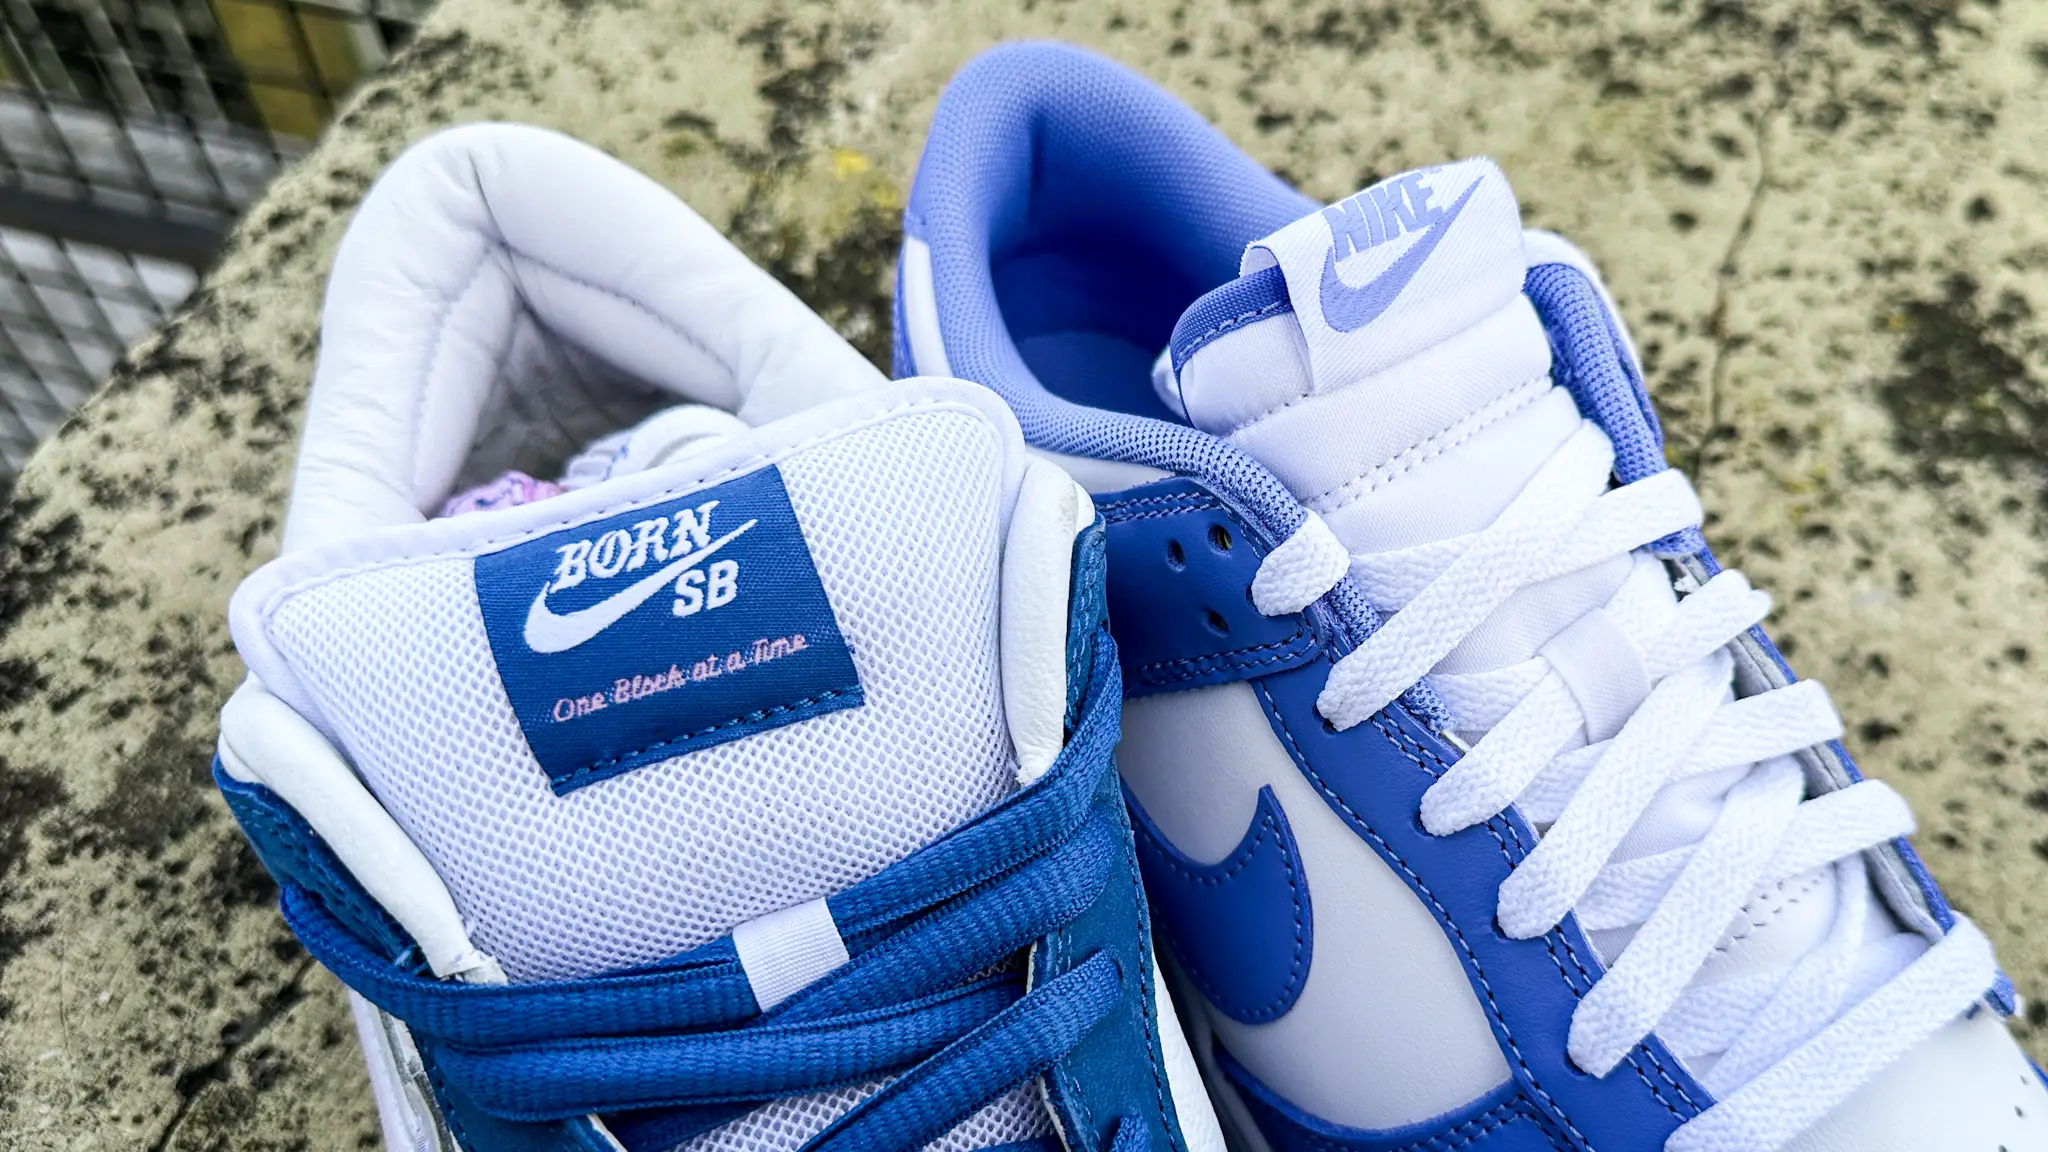 Nike SB Dunk VS Regular Dunk: What Are the Differences?